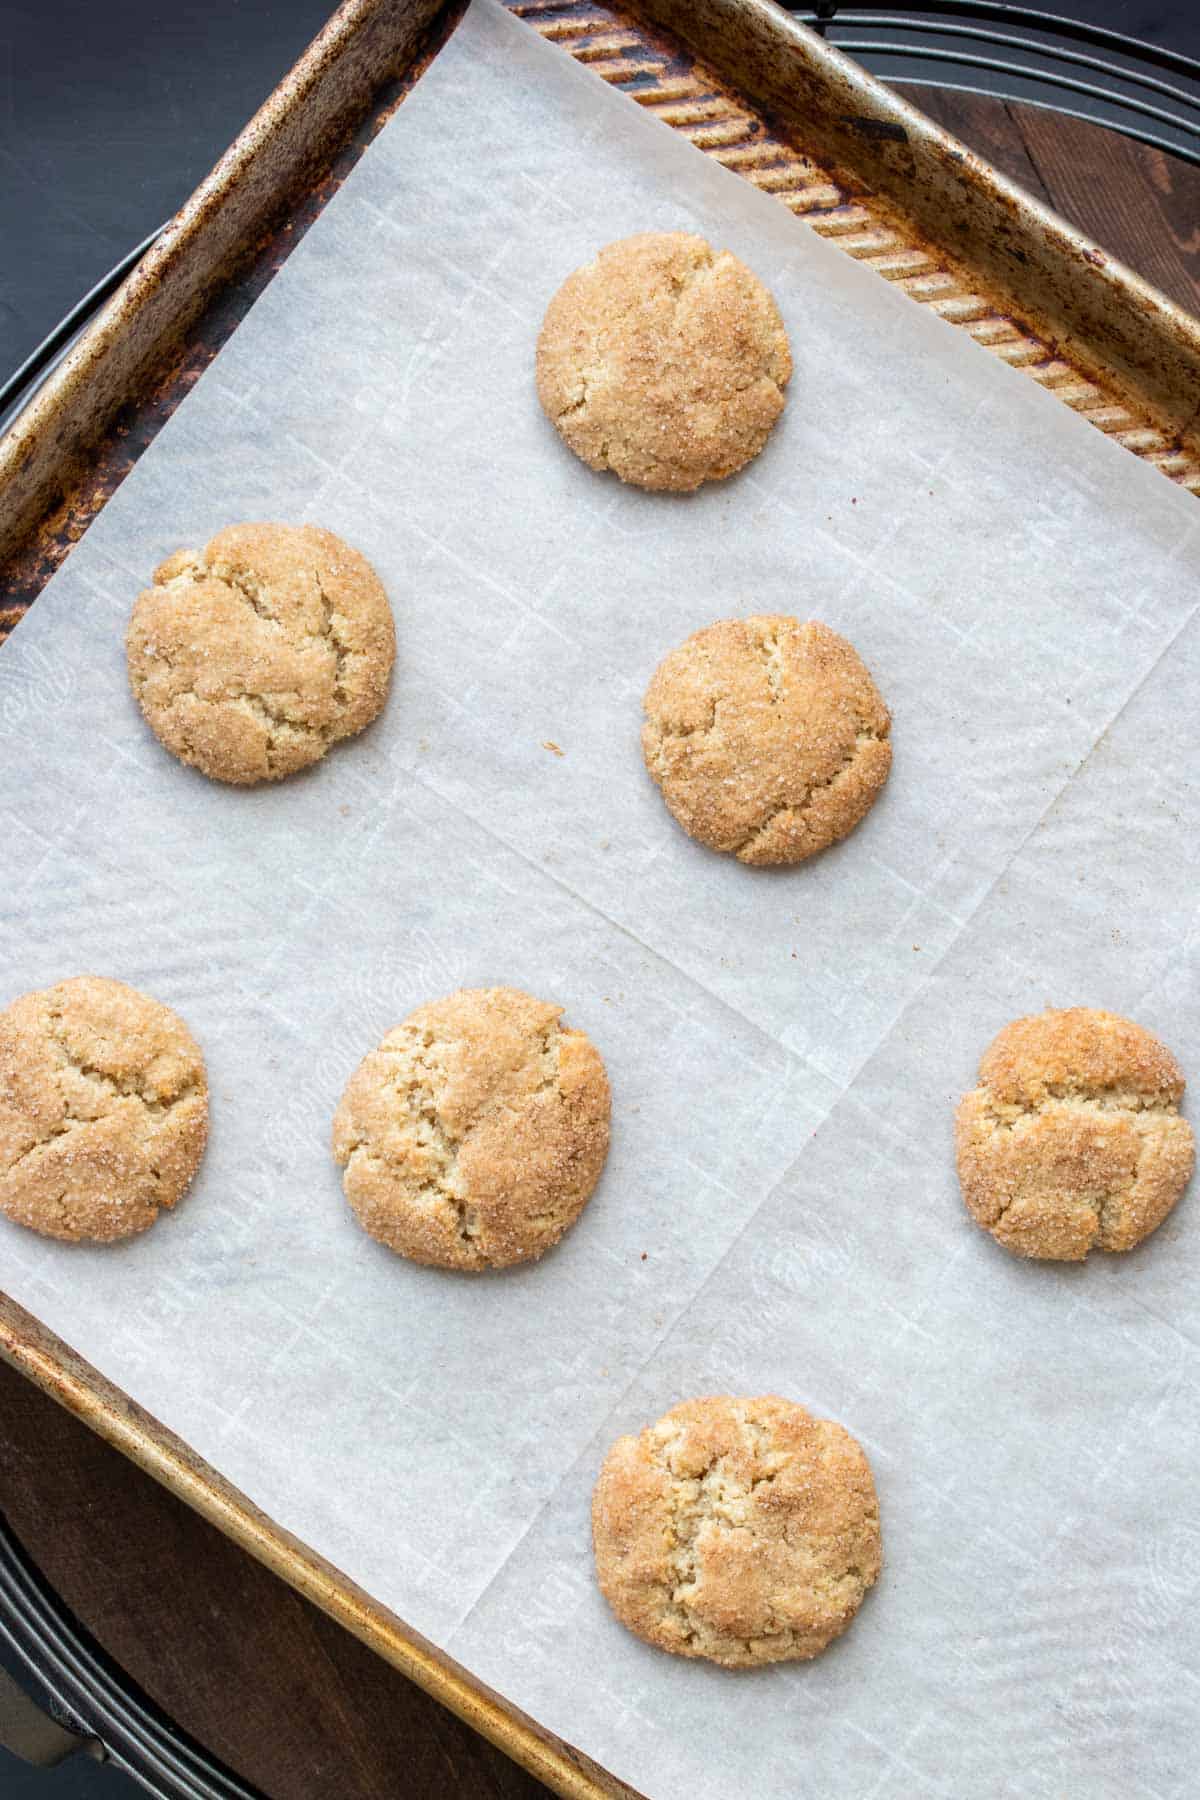 Cookie sheet with baked snickerdoodle cookies on it